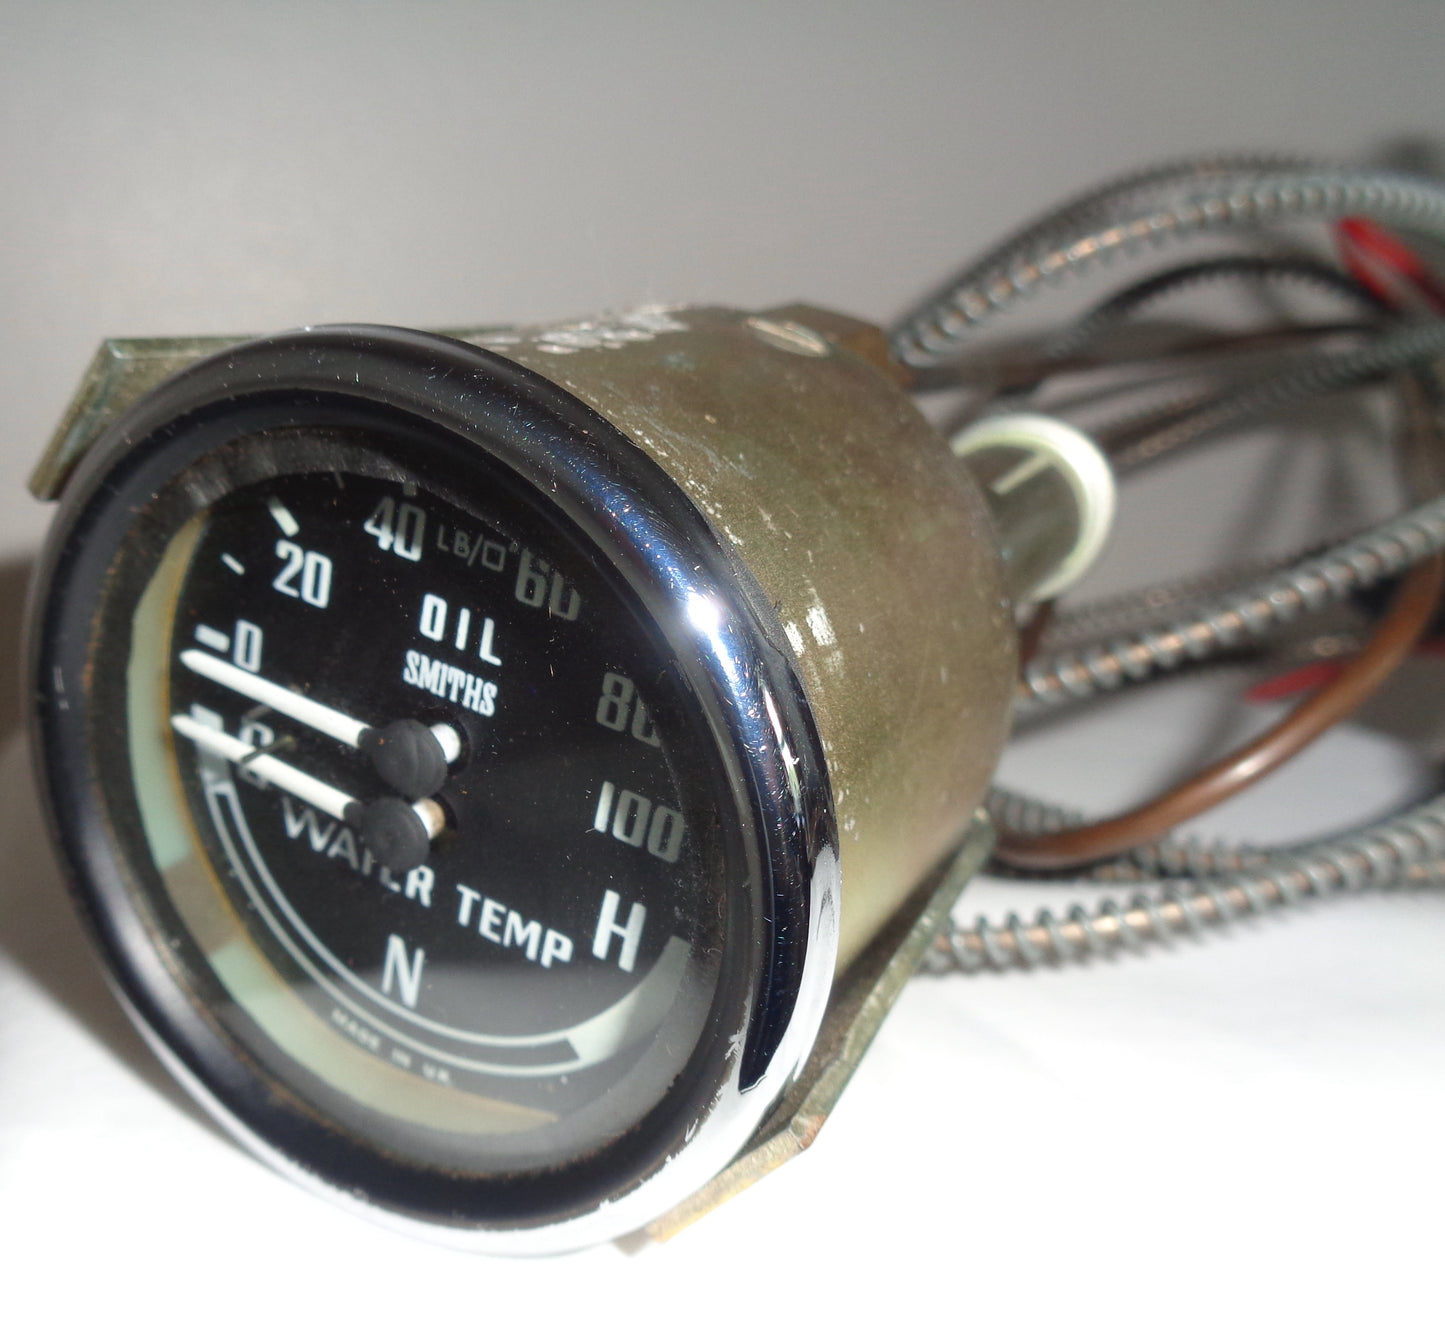 1960s Smiths Industries Dual Oil And Temperature Gauge GD 1307/1 With Fittings For A MG Midget